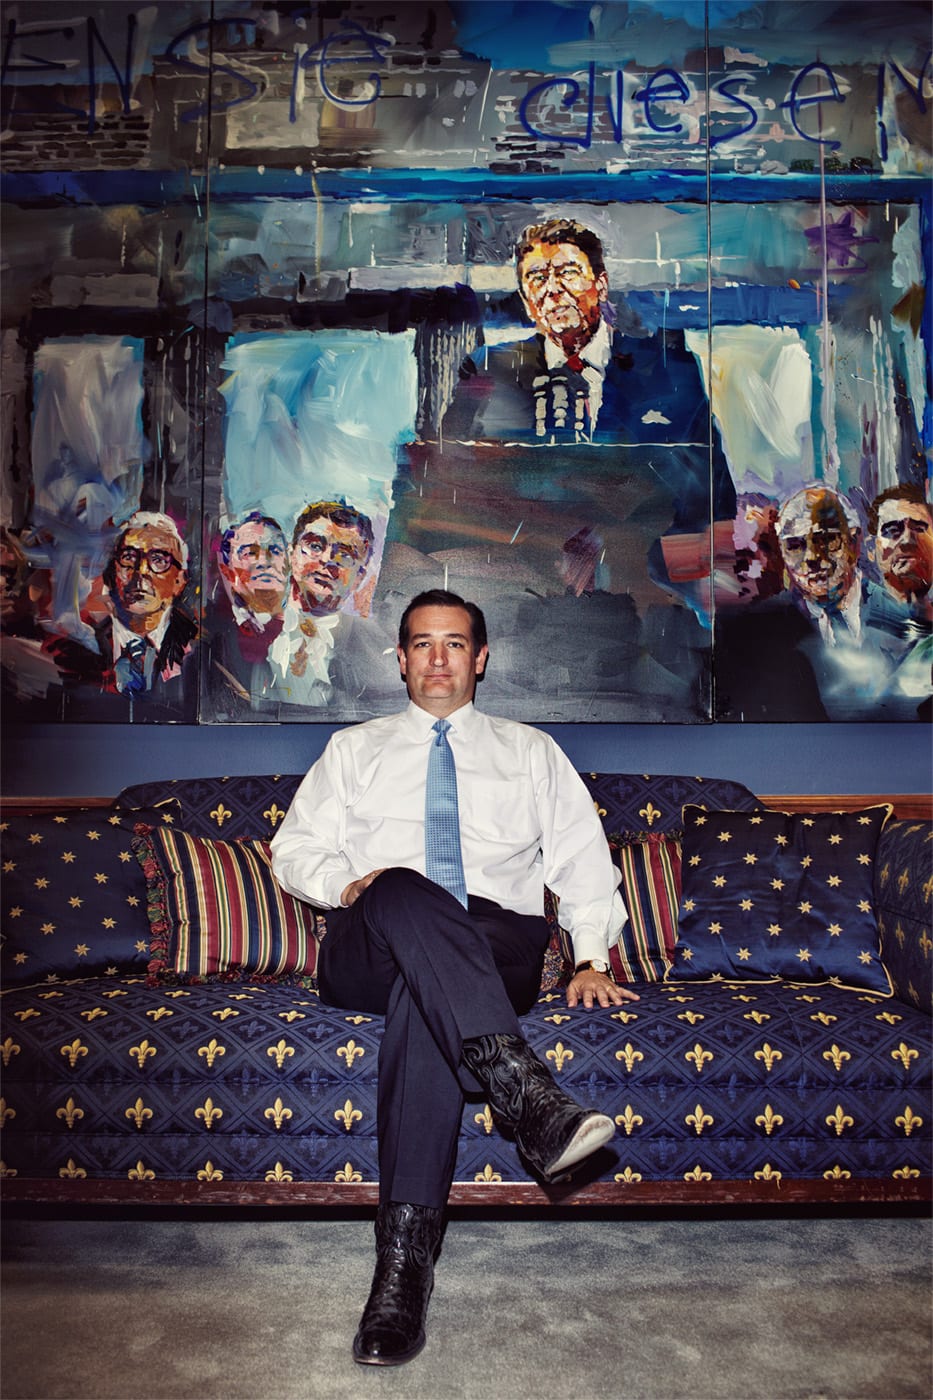 Texas Senator Ted Cruz poses for a portrait in his office, which notably features a very large painting by the artist Steve Penley of President Ronald Reagan delivering his "tear down this wall" Brandenburg Gate speech.